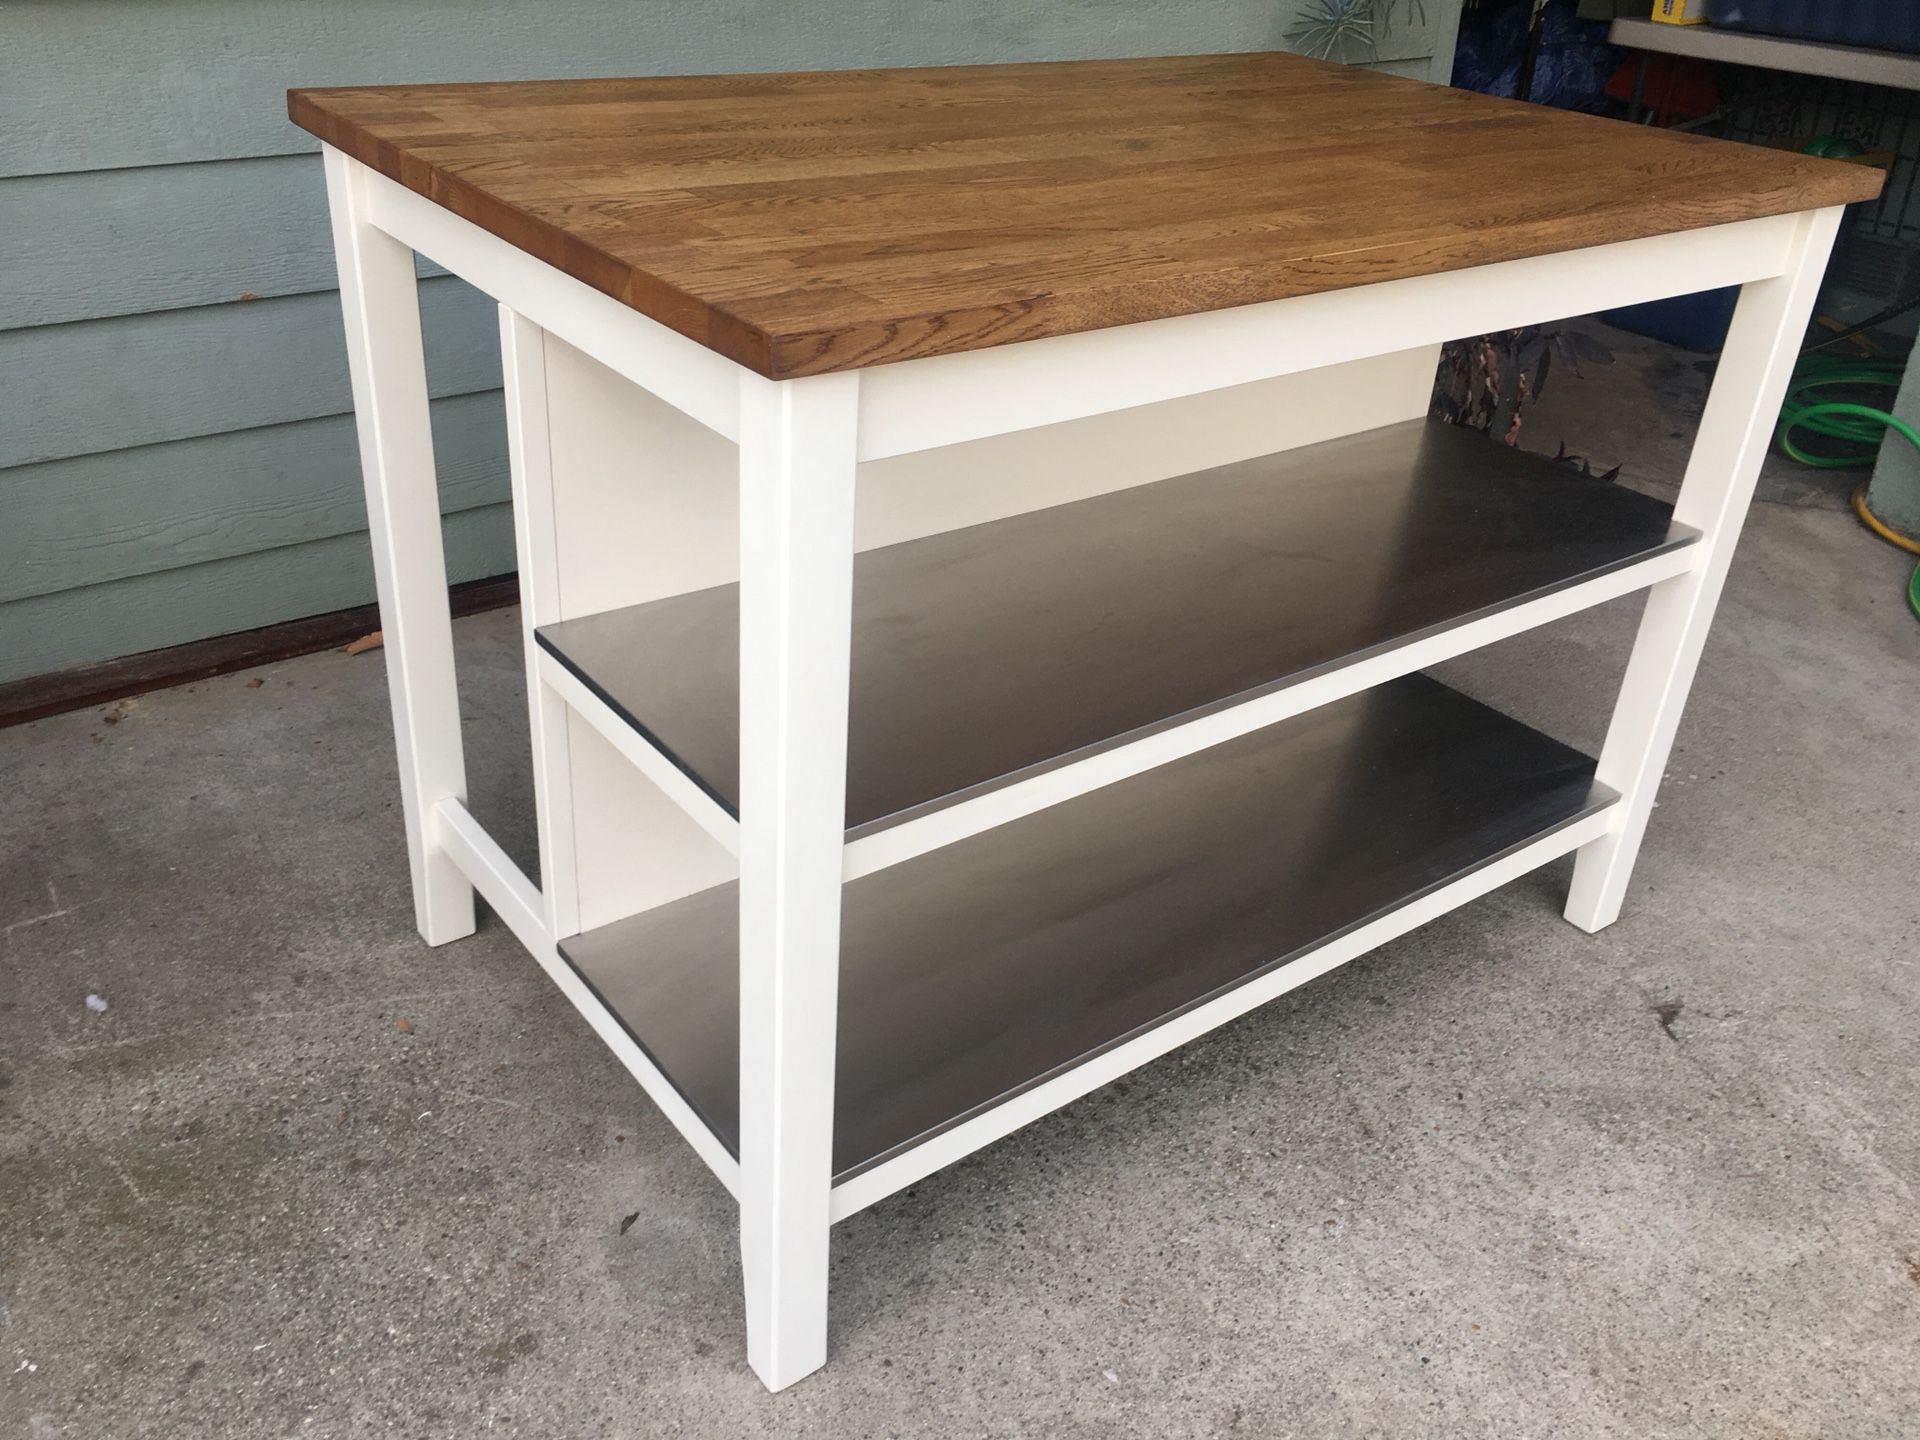 Large Kitchen island with stainless steel shelves